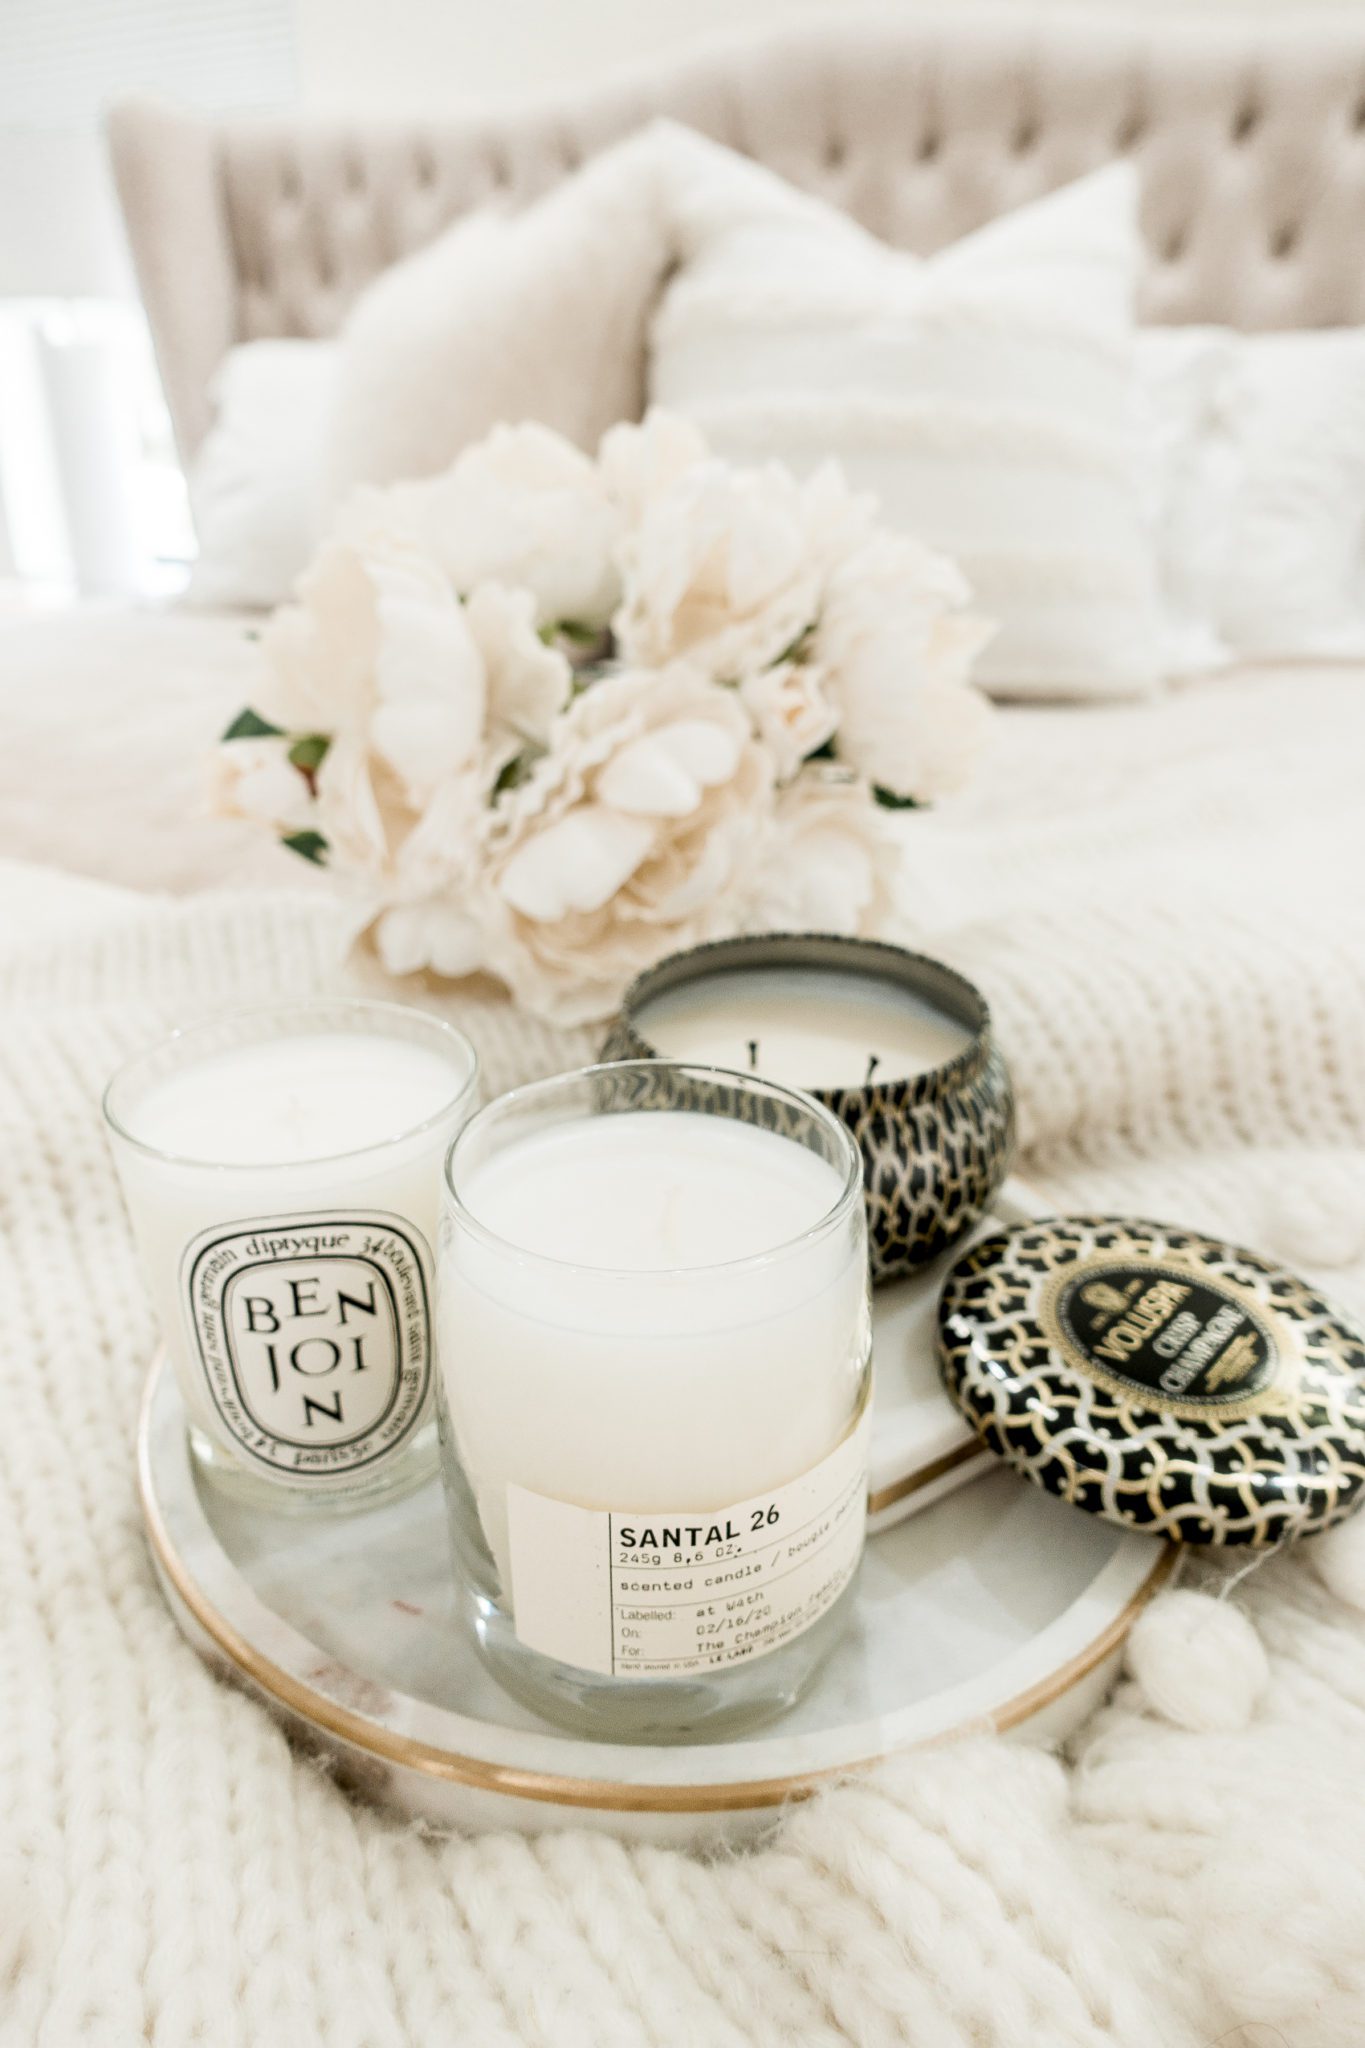 The Voluspa candles and Le Labo votive candle set | Top 10 Home Decor Favorites from the Nordstrom Anniversary Sale